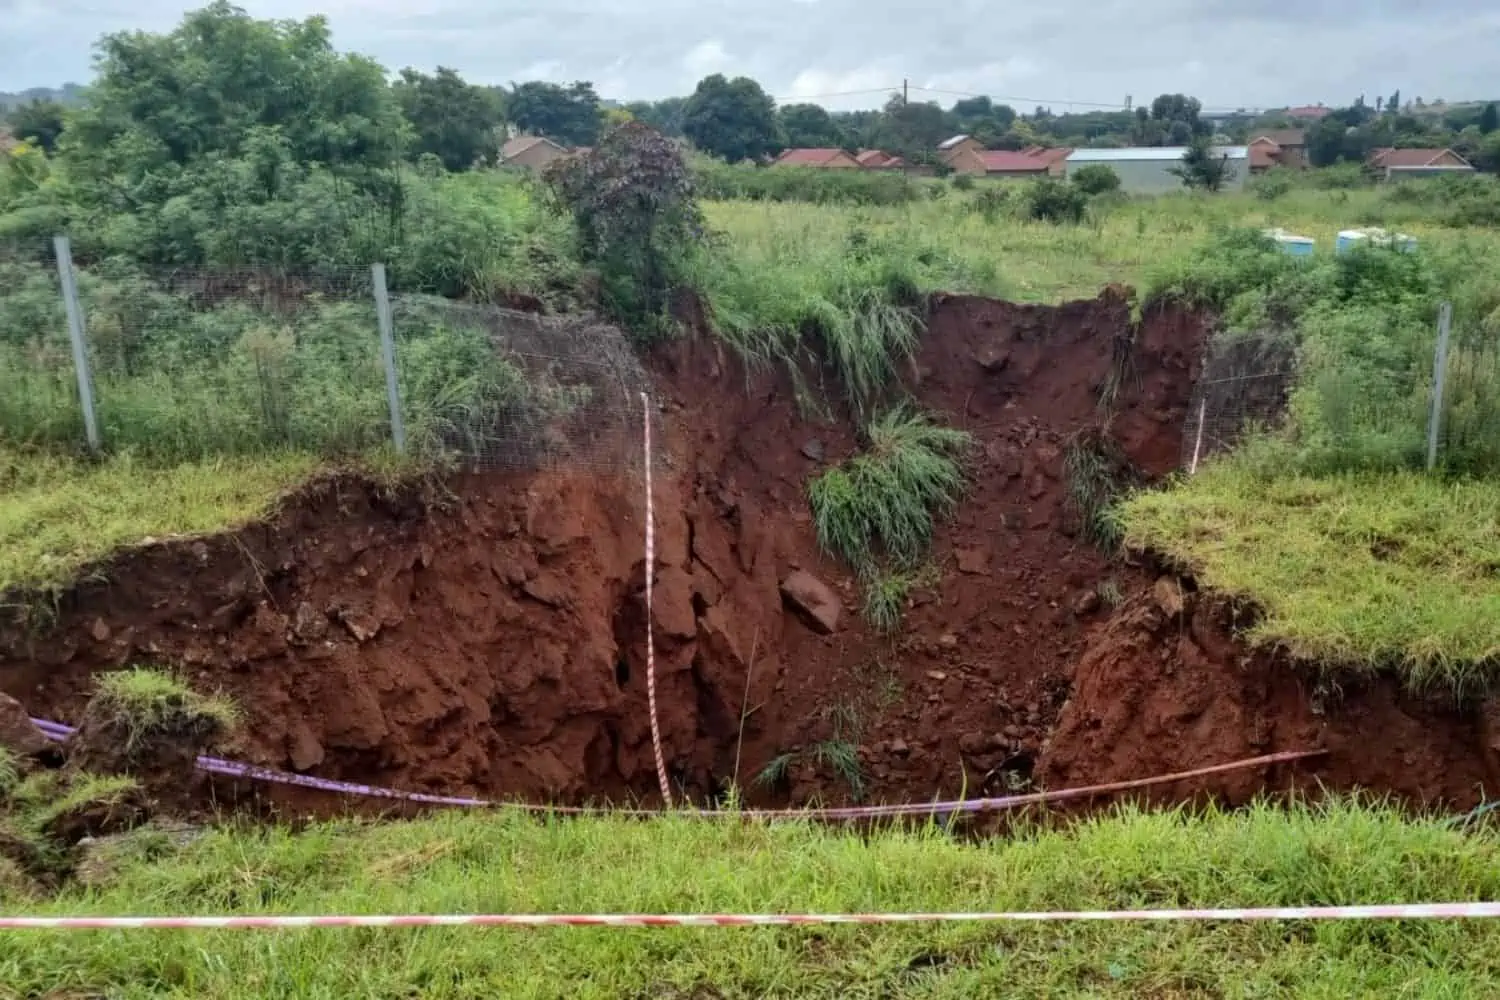 N1 lane closed due to sinkhole in Centurion